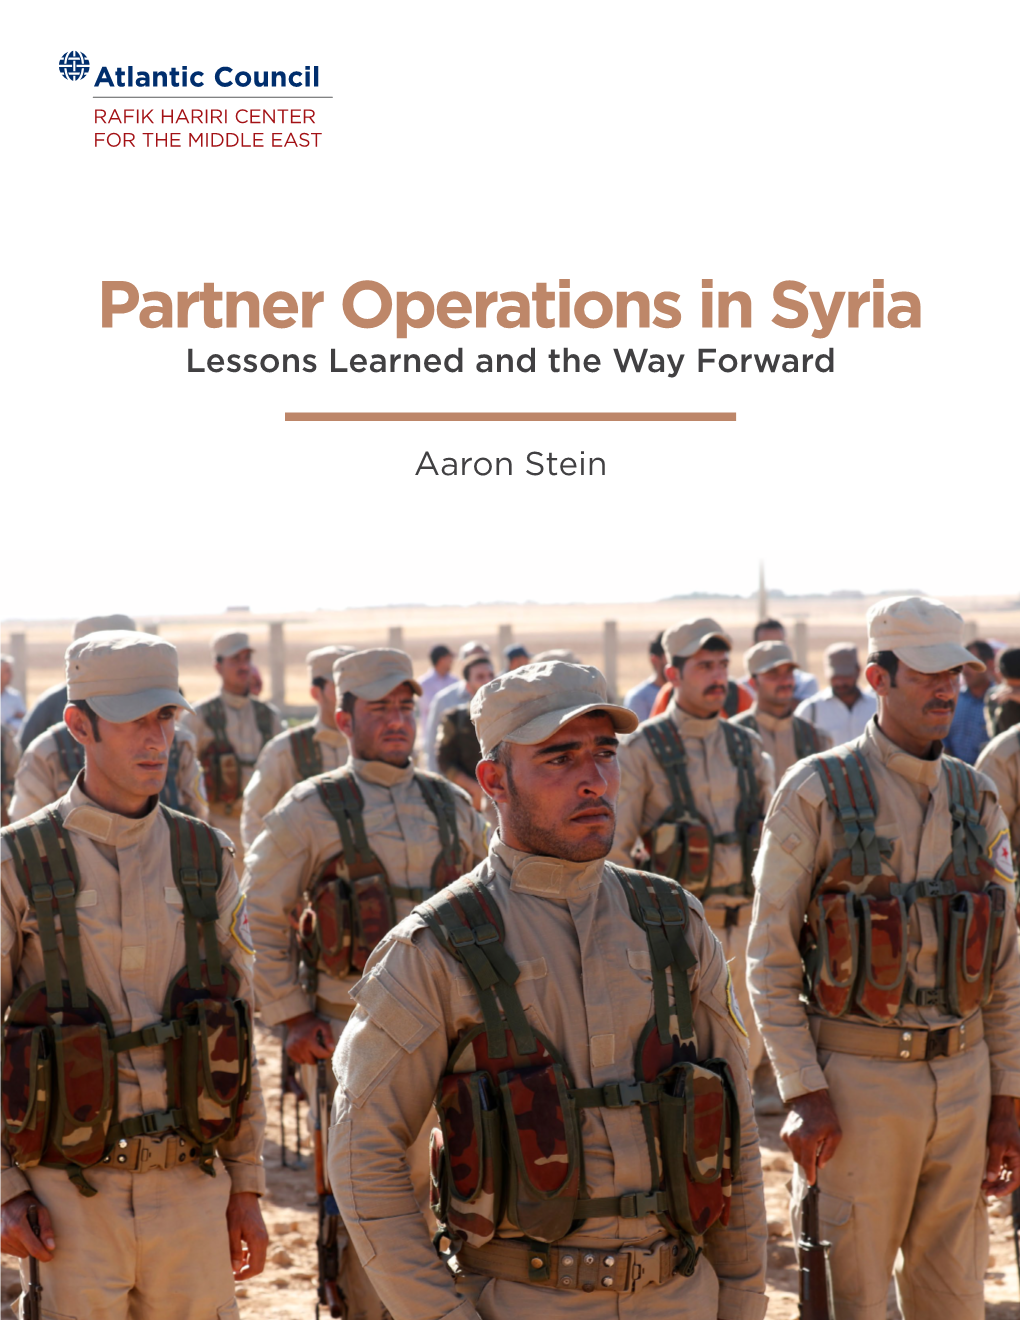 Partner Operations in Syria Lessons Learned and the Way Forward